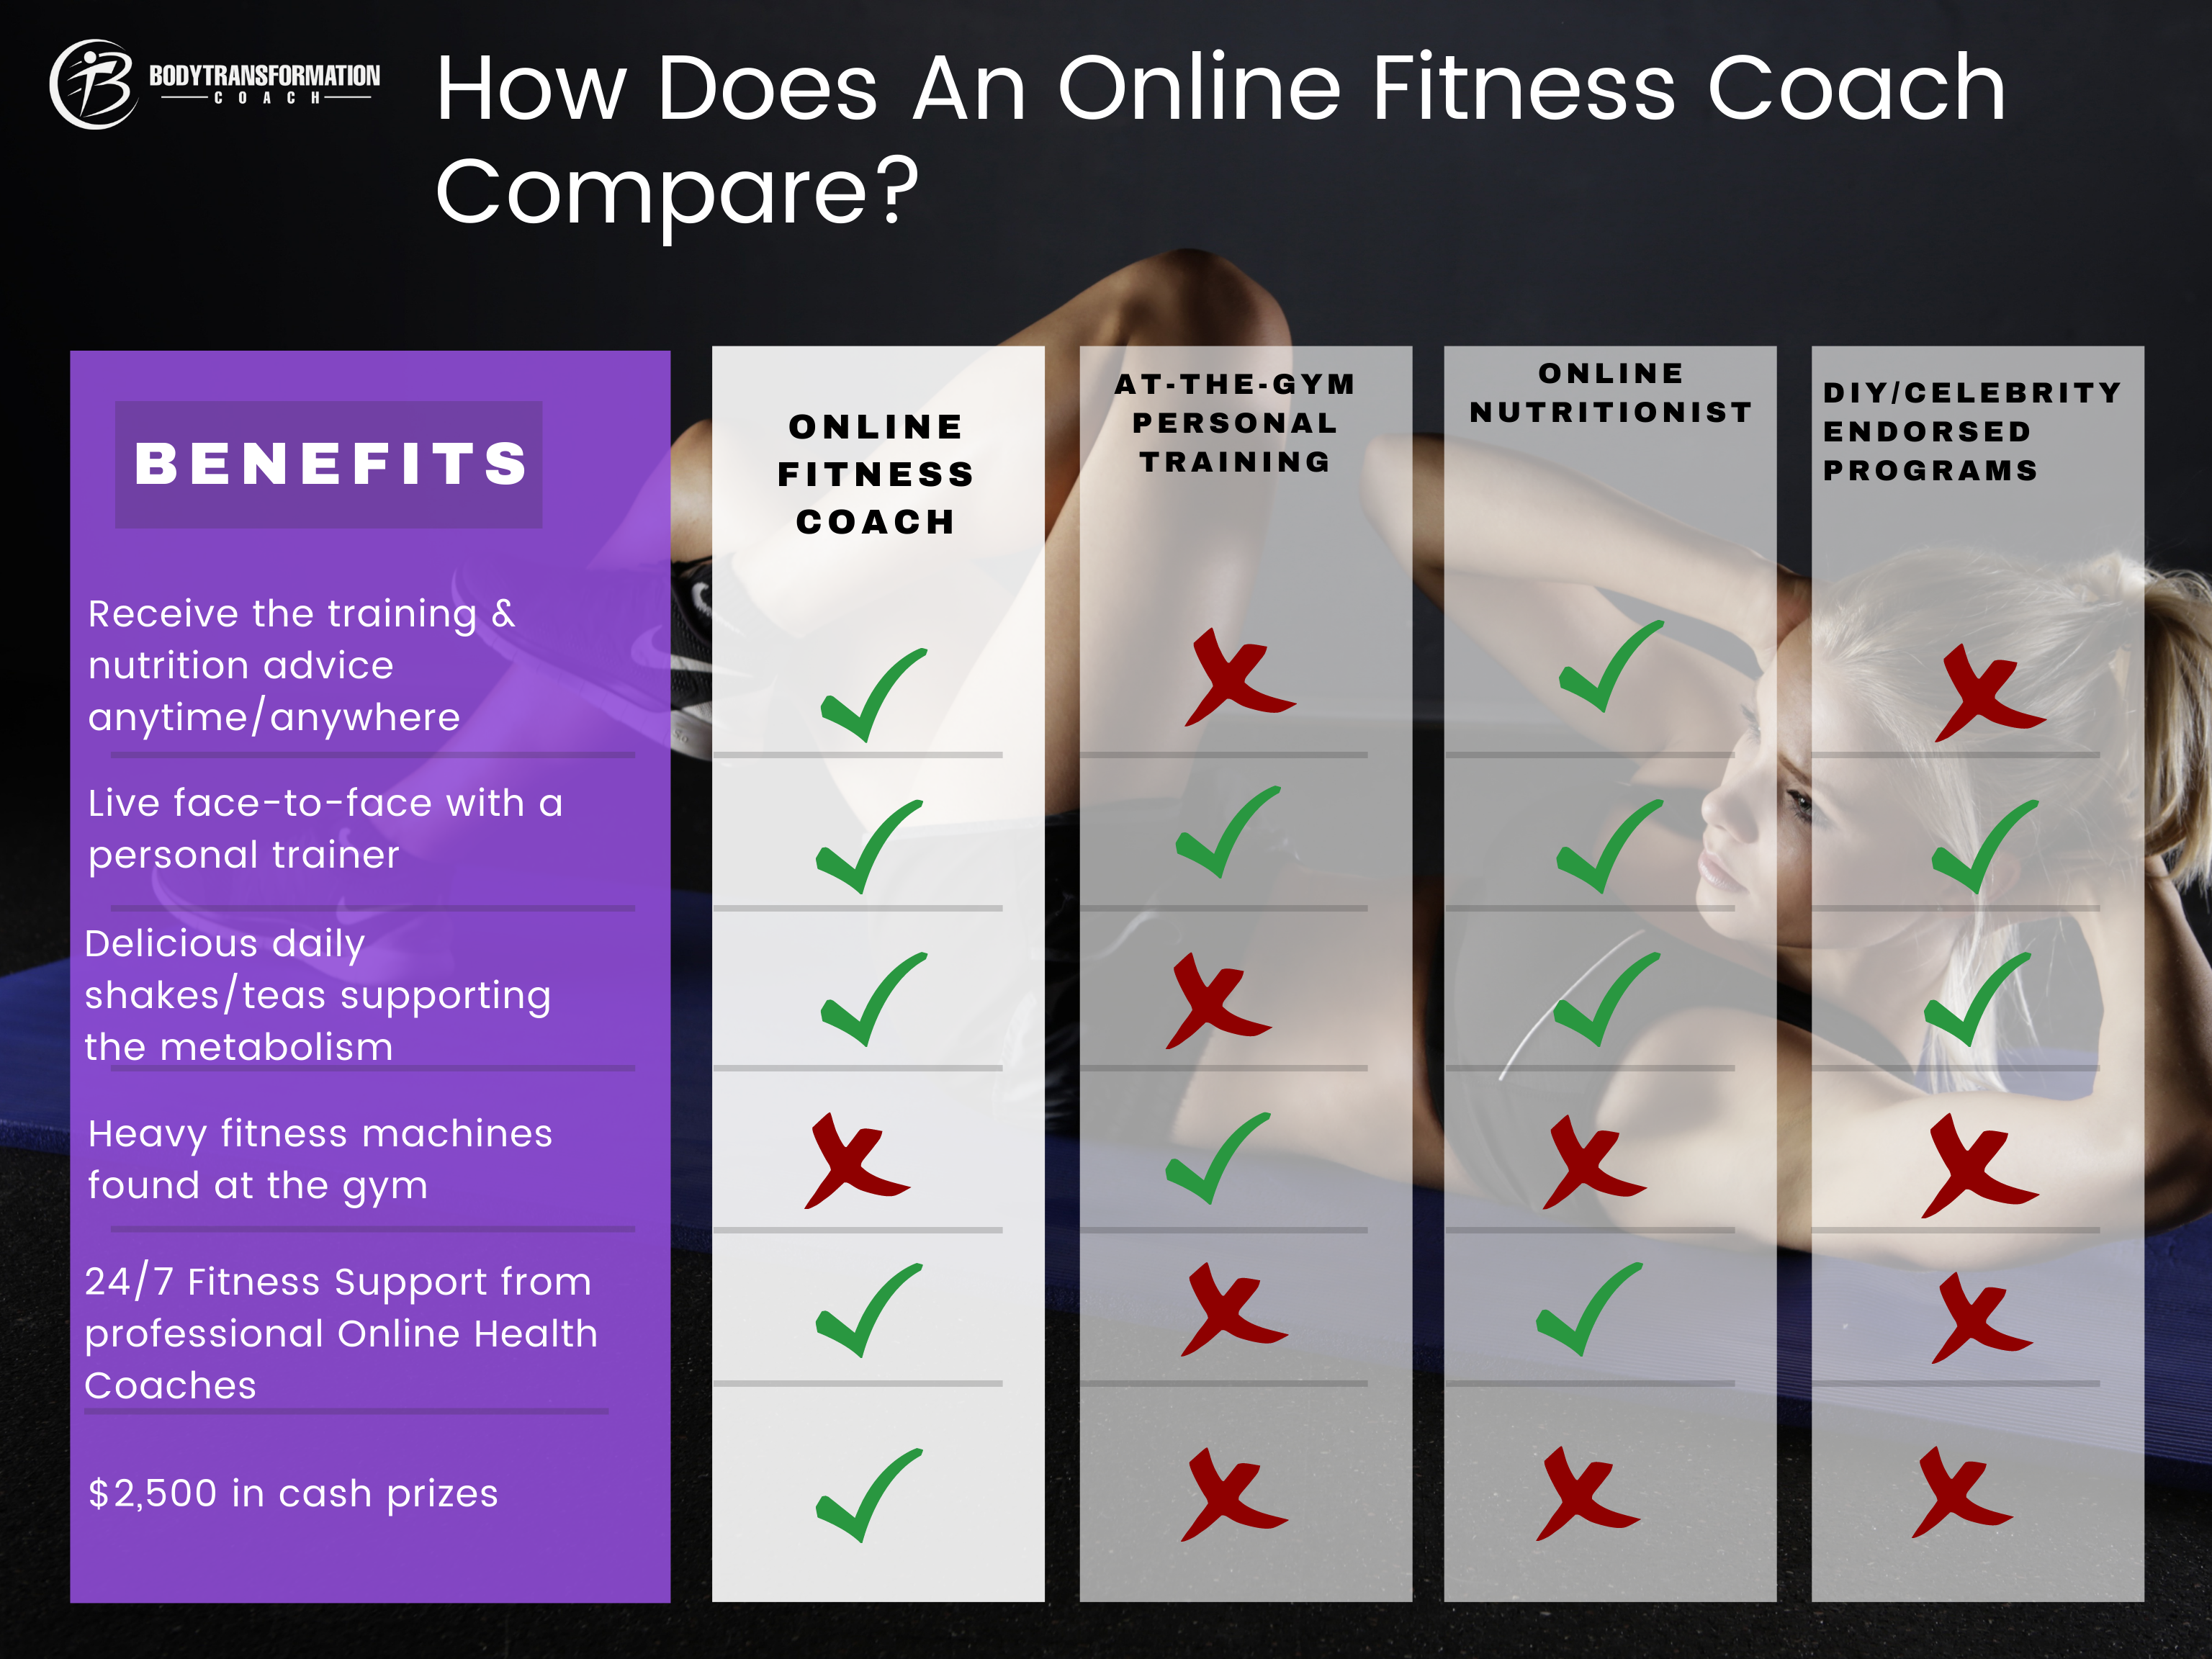 Online Personal Trainer: Find an Online Fitness Coach